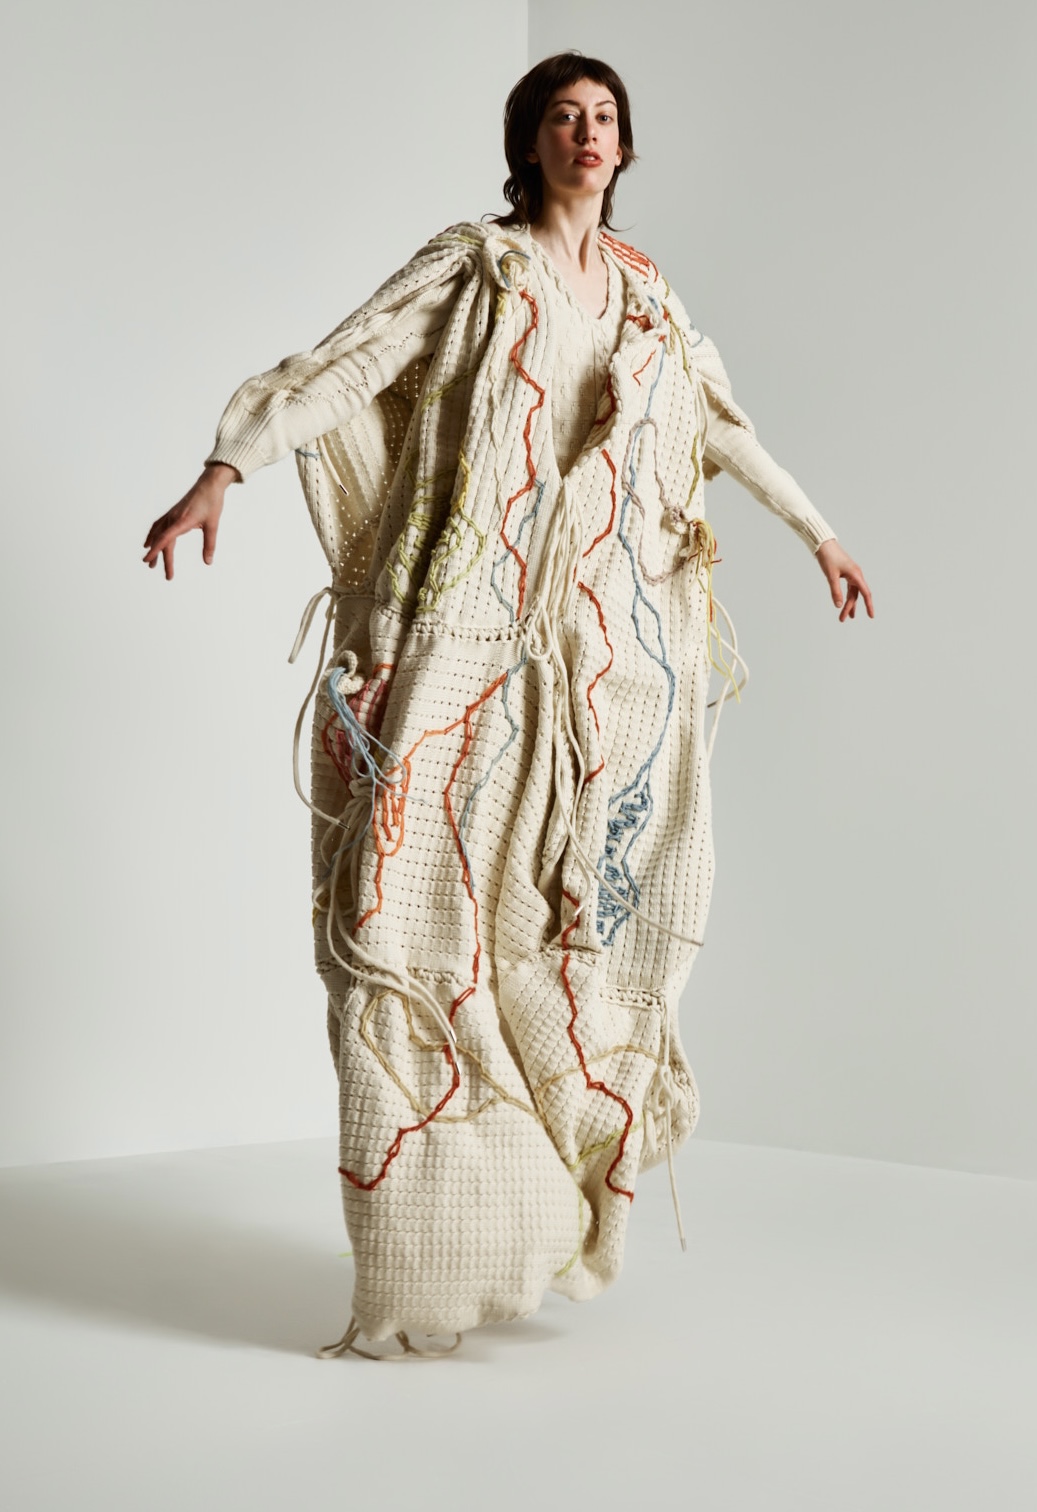 Full-length image of a model posing in a cream knitted garment, featuring embroidery and a handkerchief head covering. She appears to be jumping or floating.